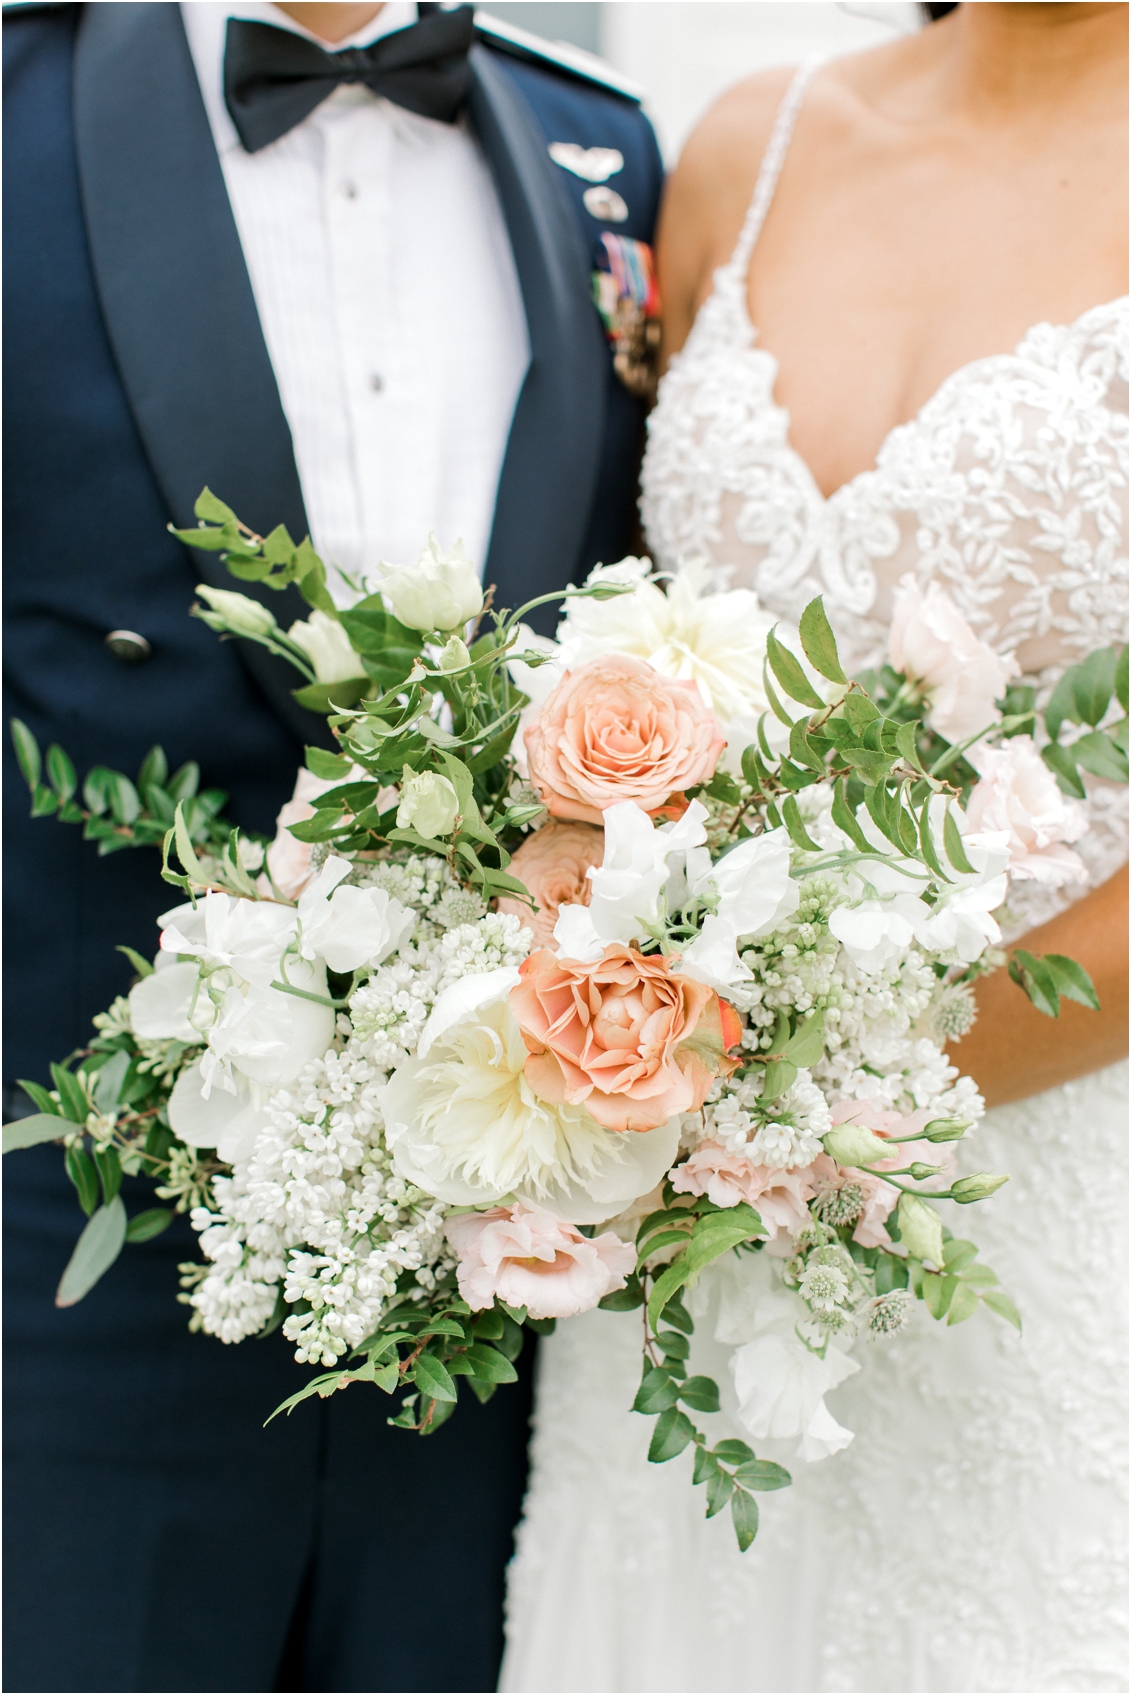 Wedding at Rustic Grace Estate by Gaby Caskey Photography, blush bridal bouquet